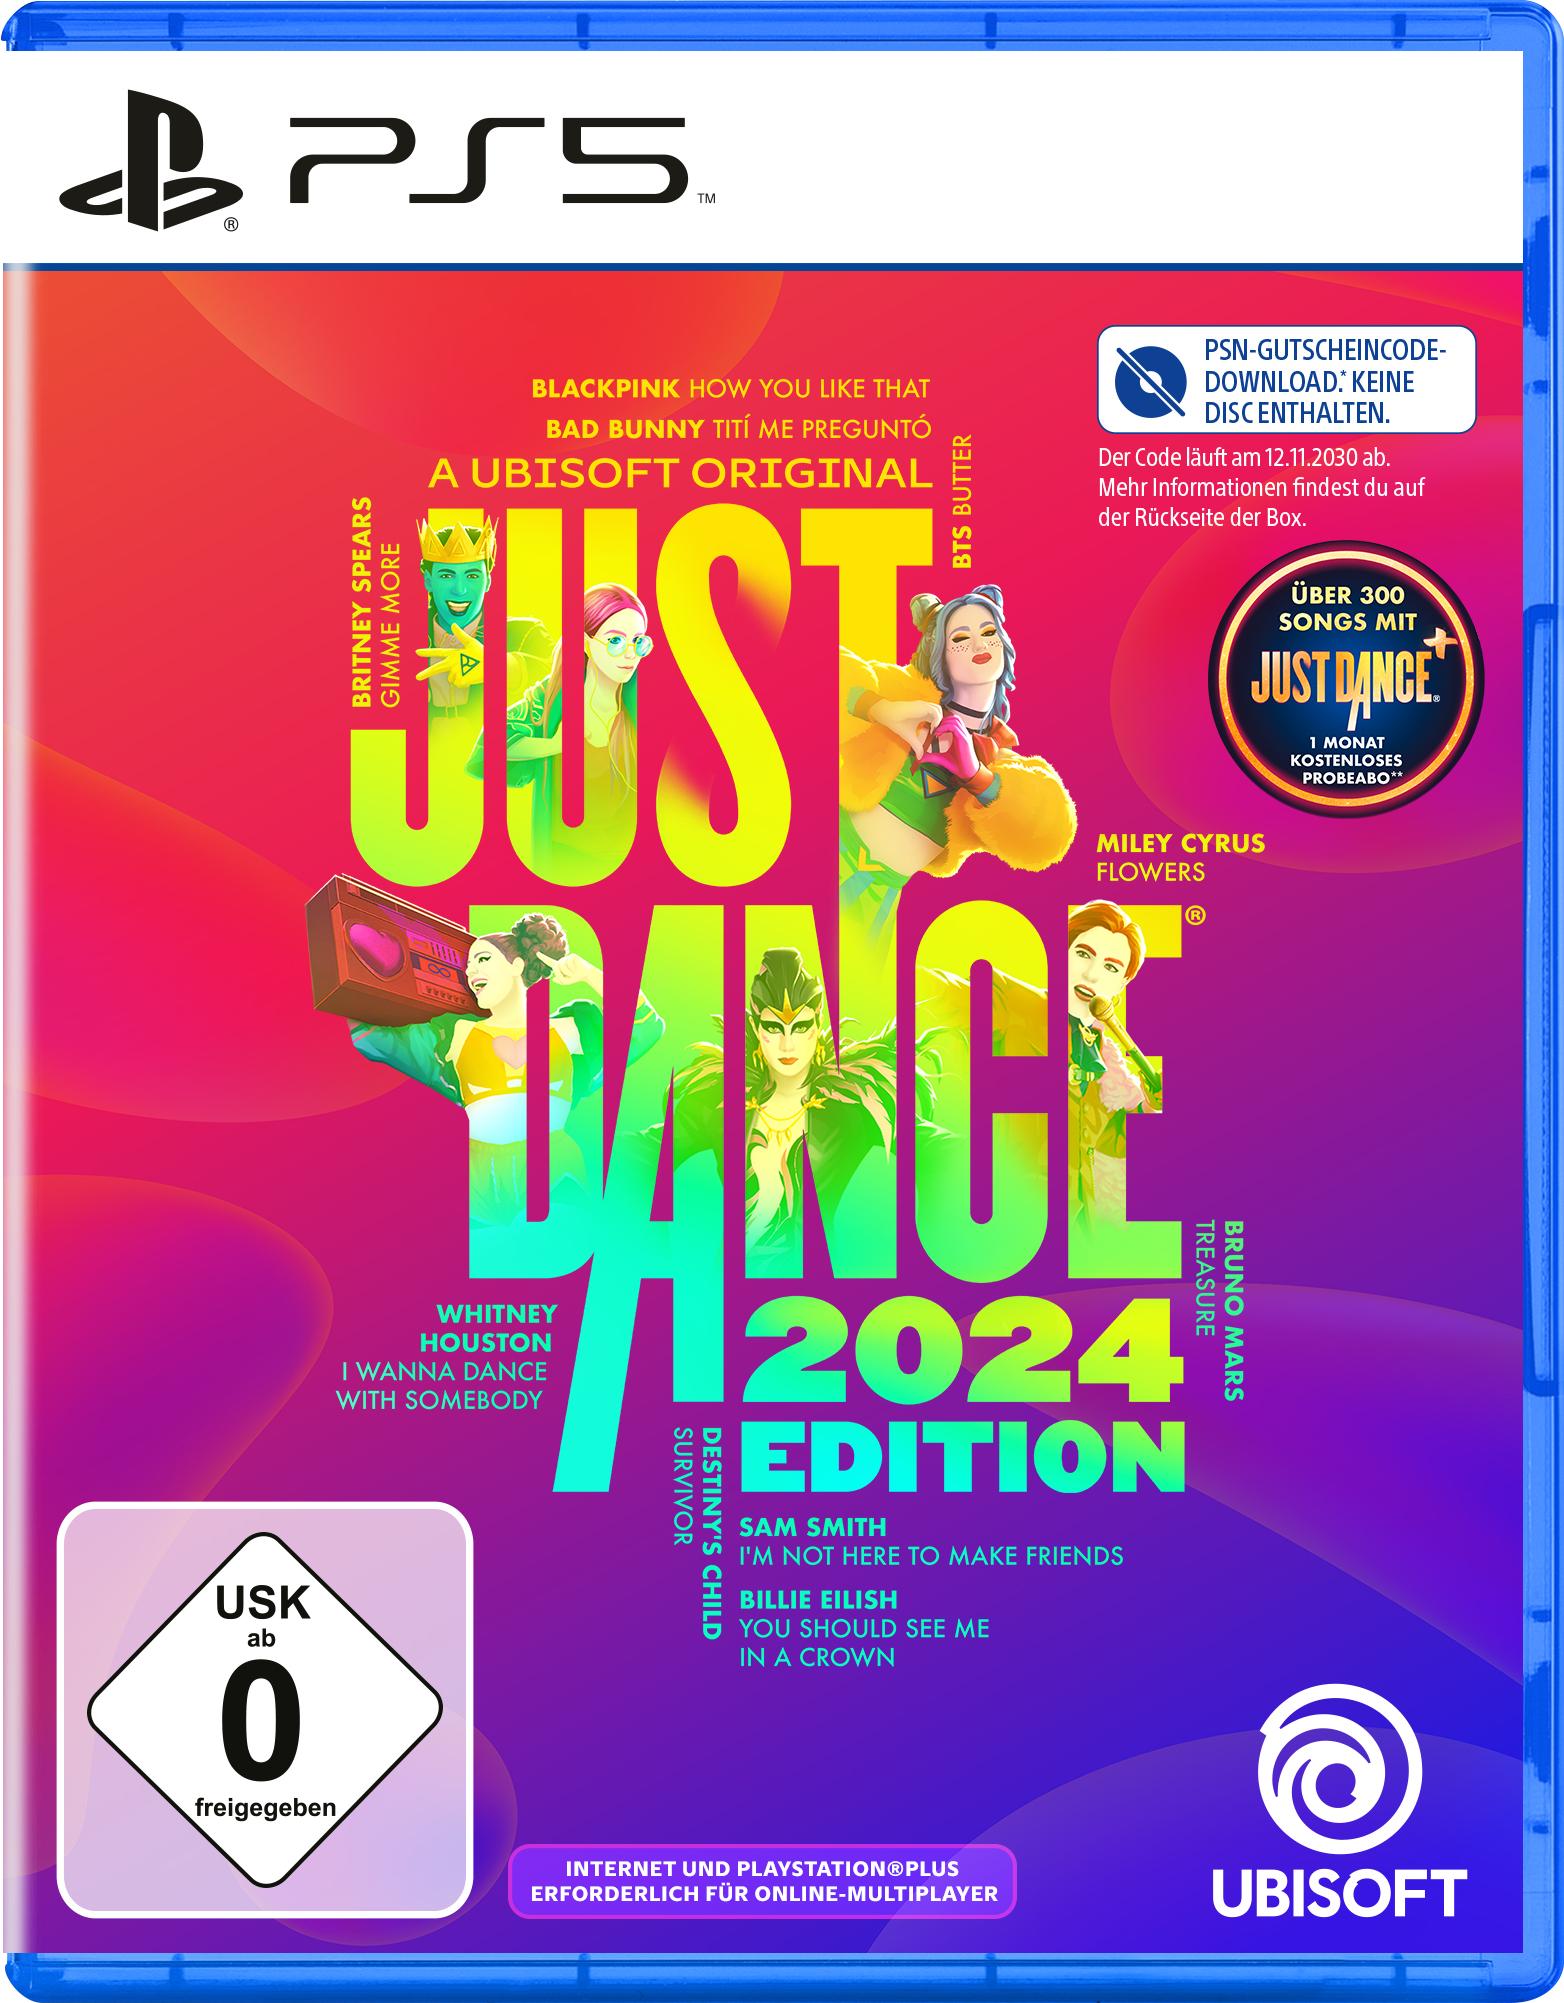 Edition 2024 5] Just Dance - [PlayStation